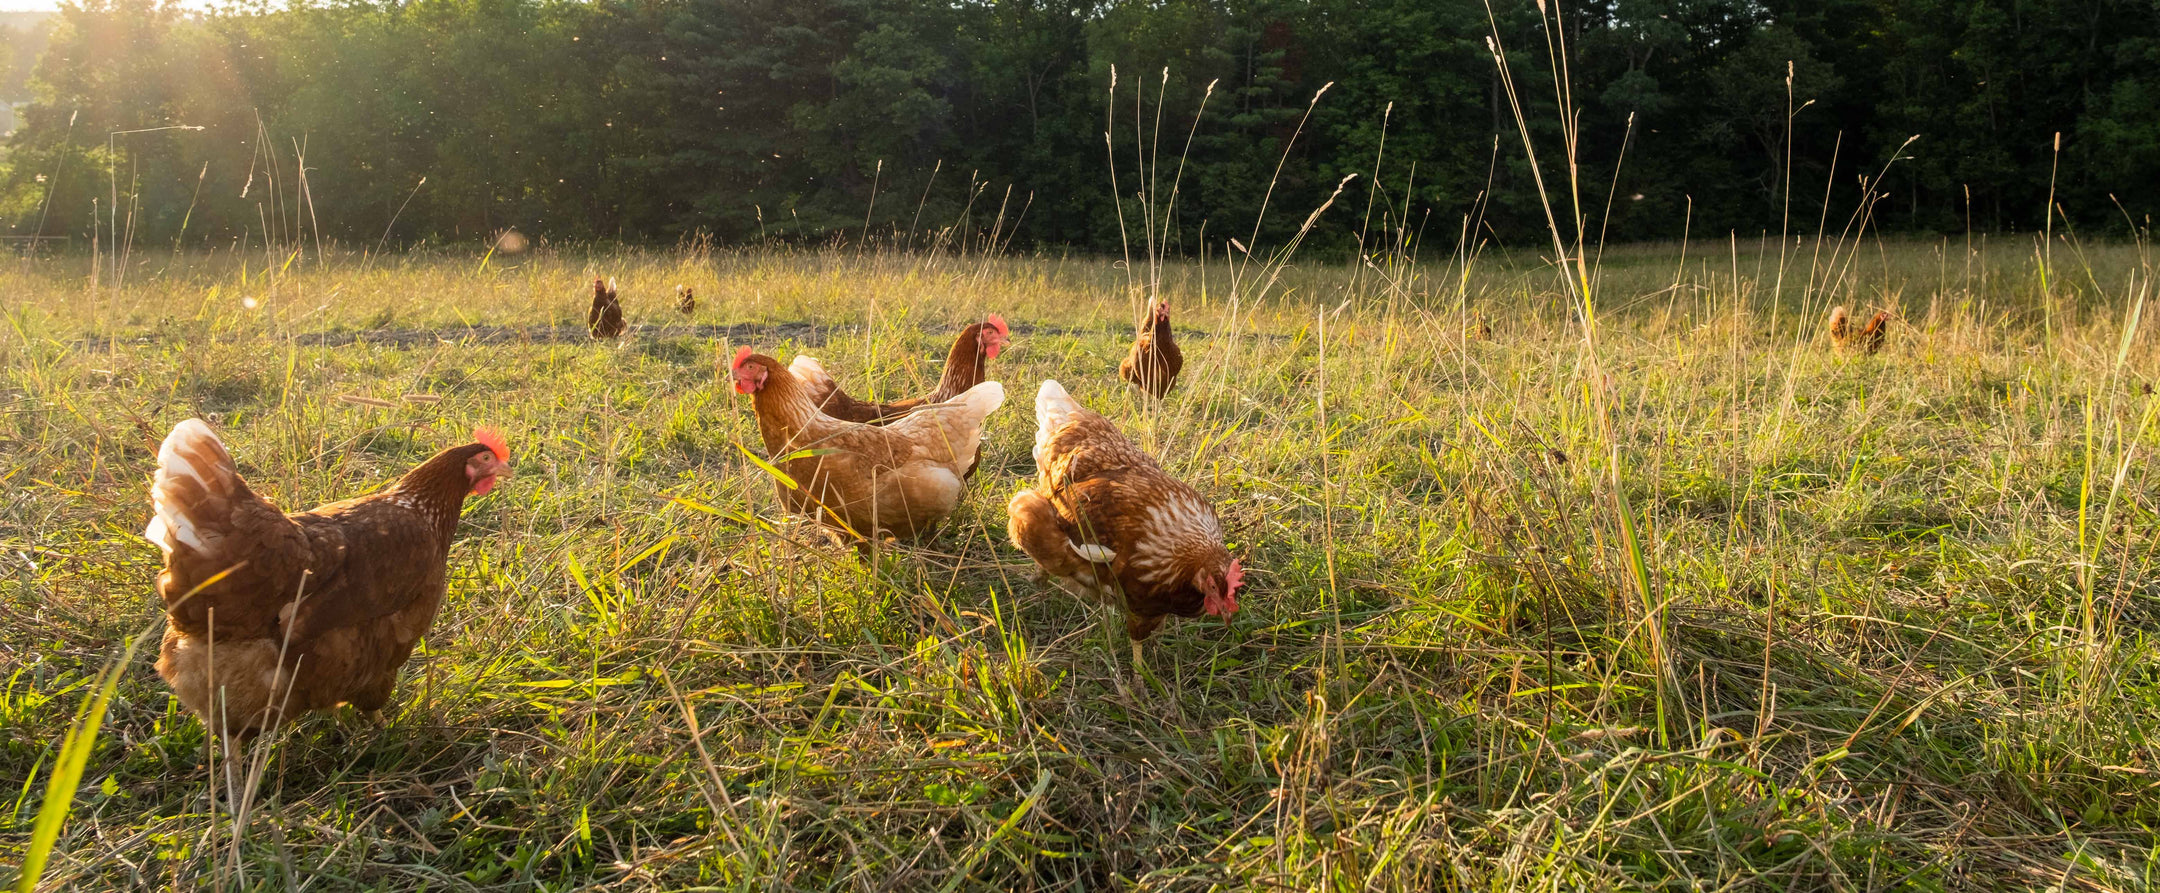 Chickens foraging in a field